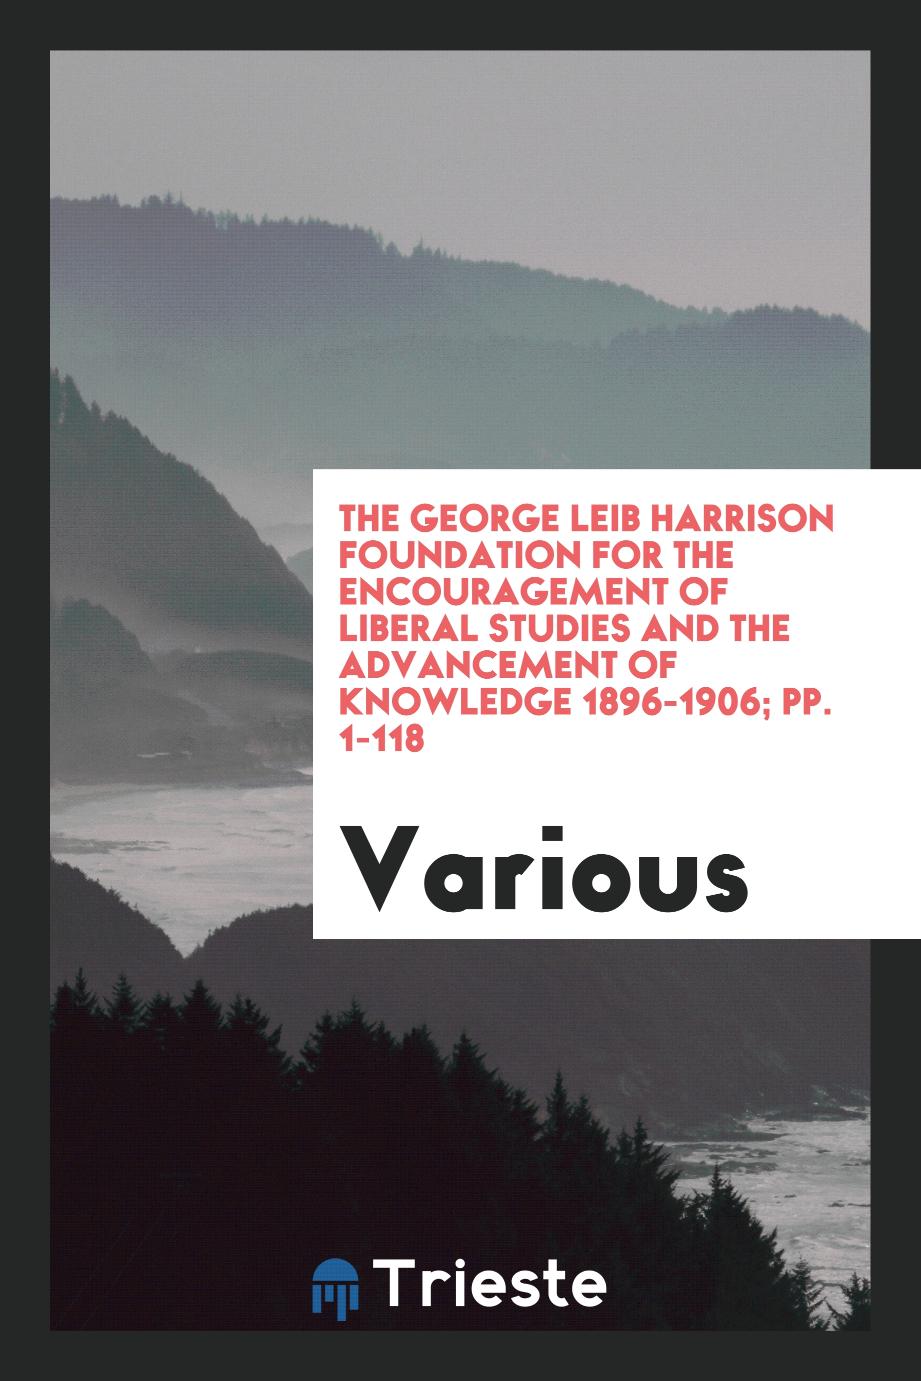 The George Leib Harrison Foundation for the Encouragement of Liberal Studies and the Advancement of Knowledge 1896-1906; pp. 1-118